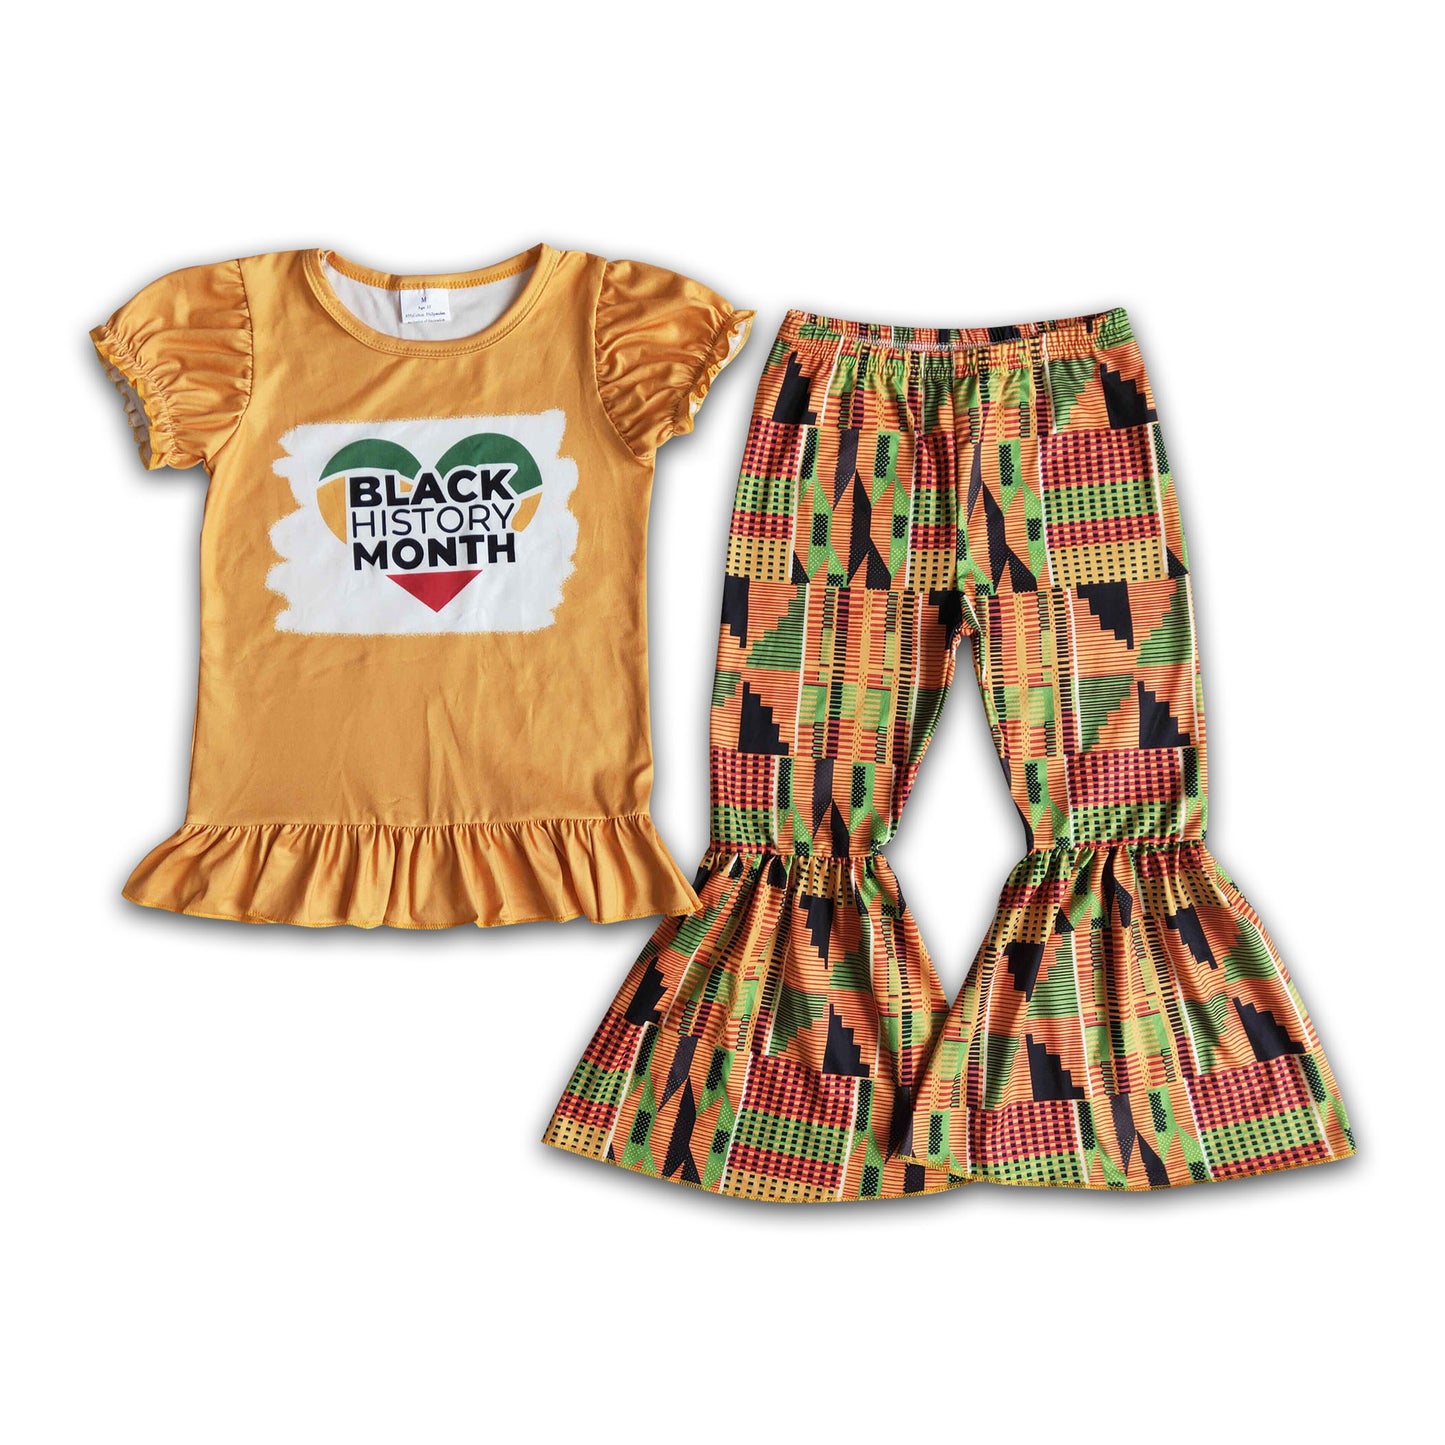 Black history month shirt bell bottom pants girls boutique clothing